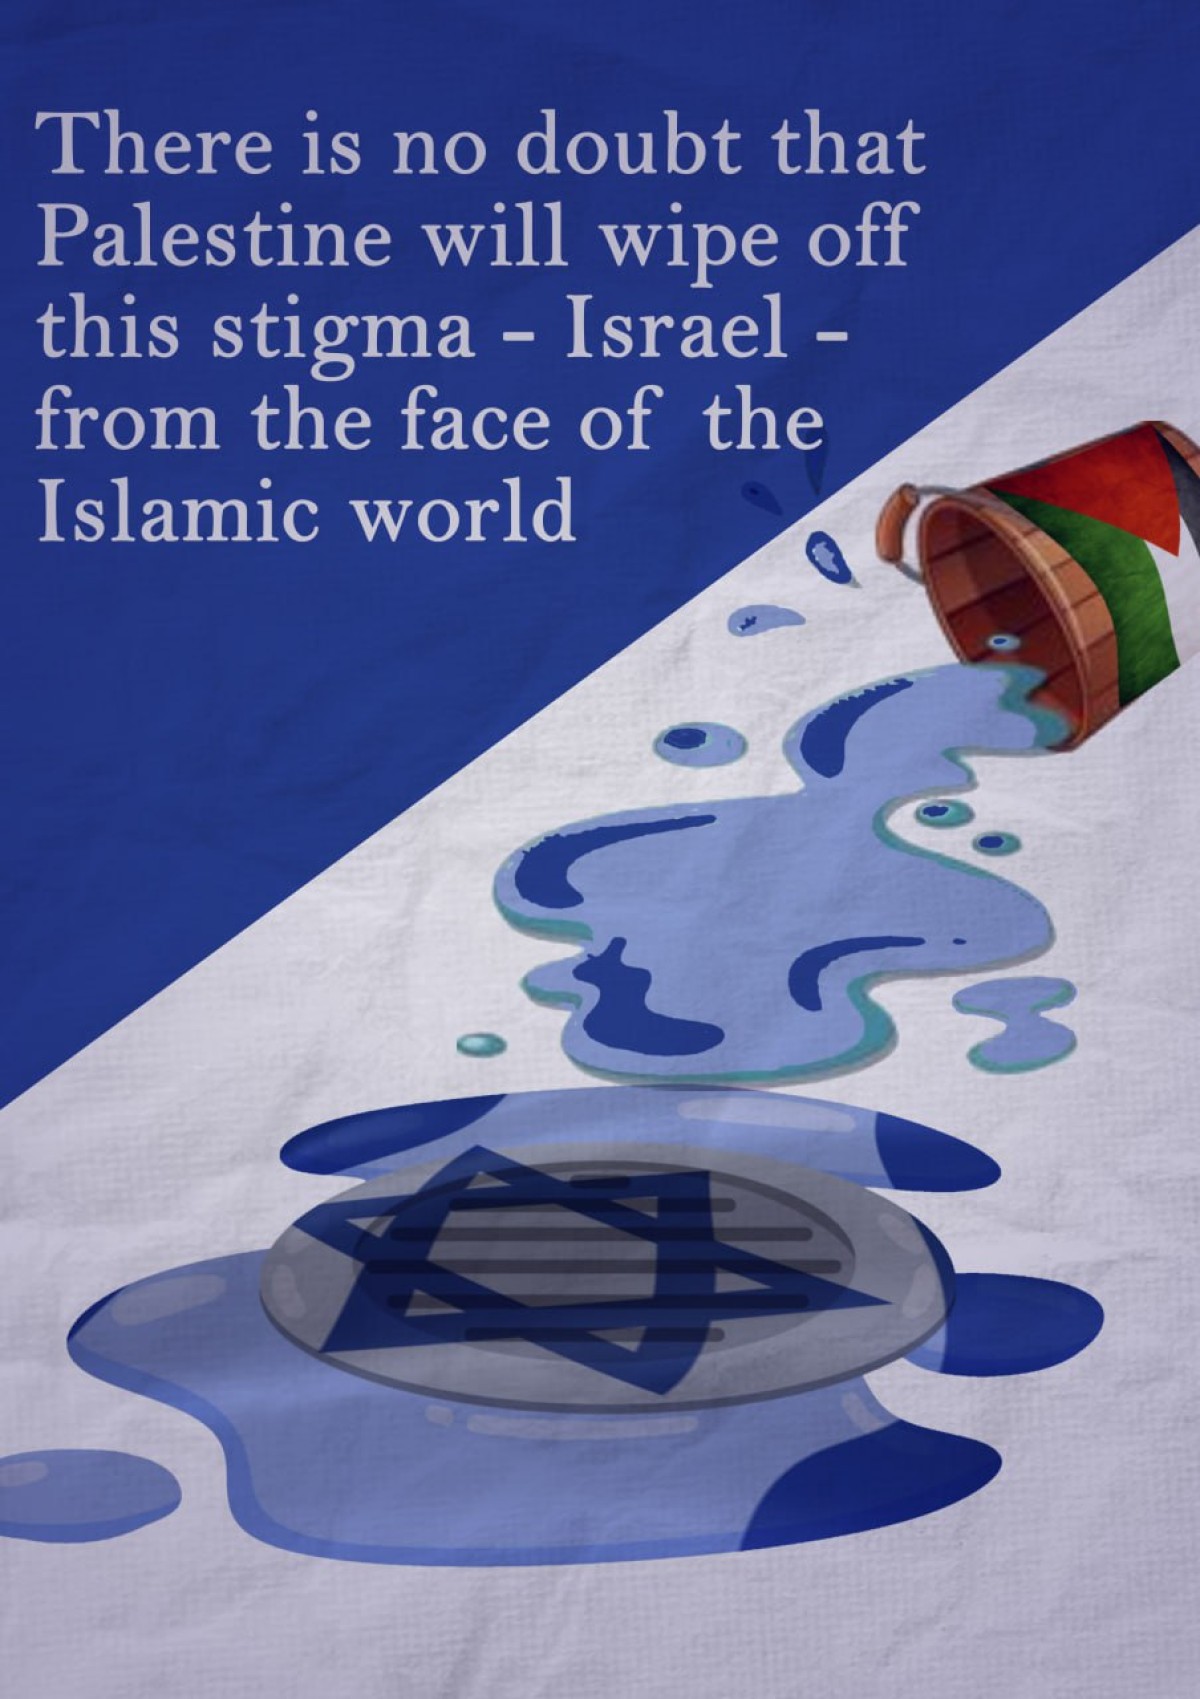 There is no doubt that Palestine will wipe off this stigma - Israel - from the face of the Islamic world